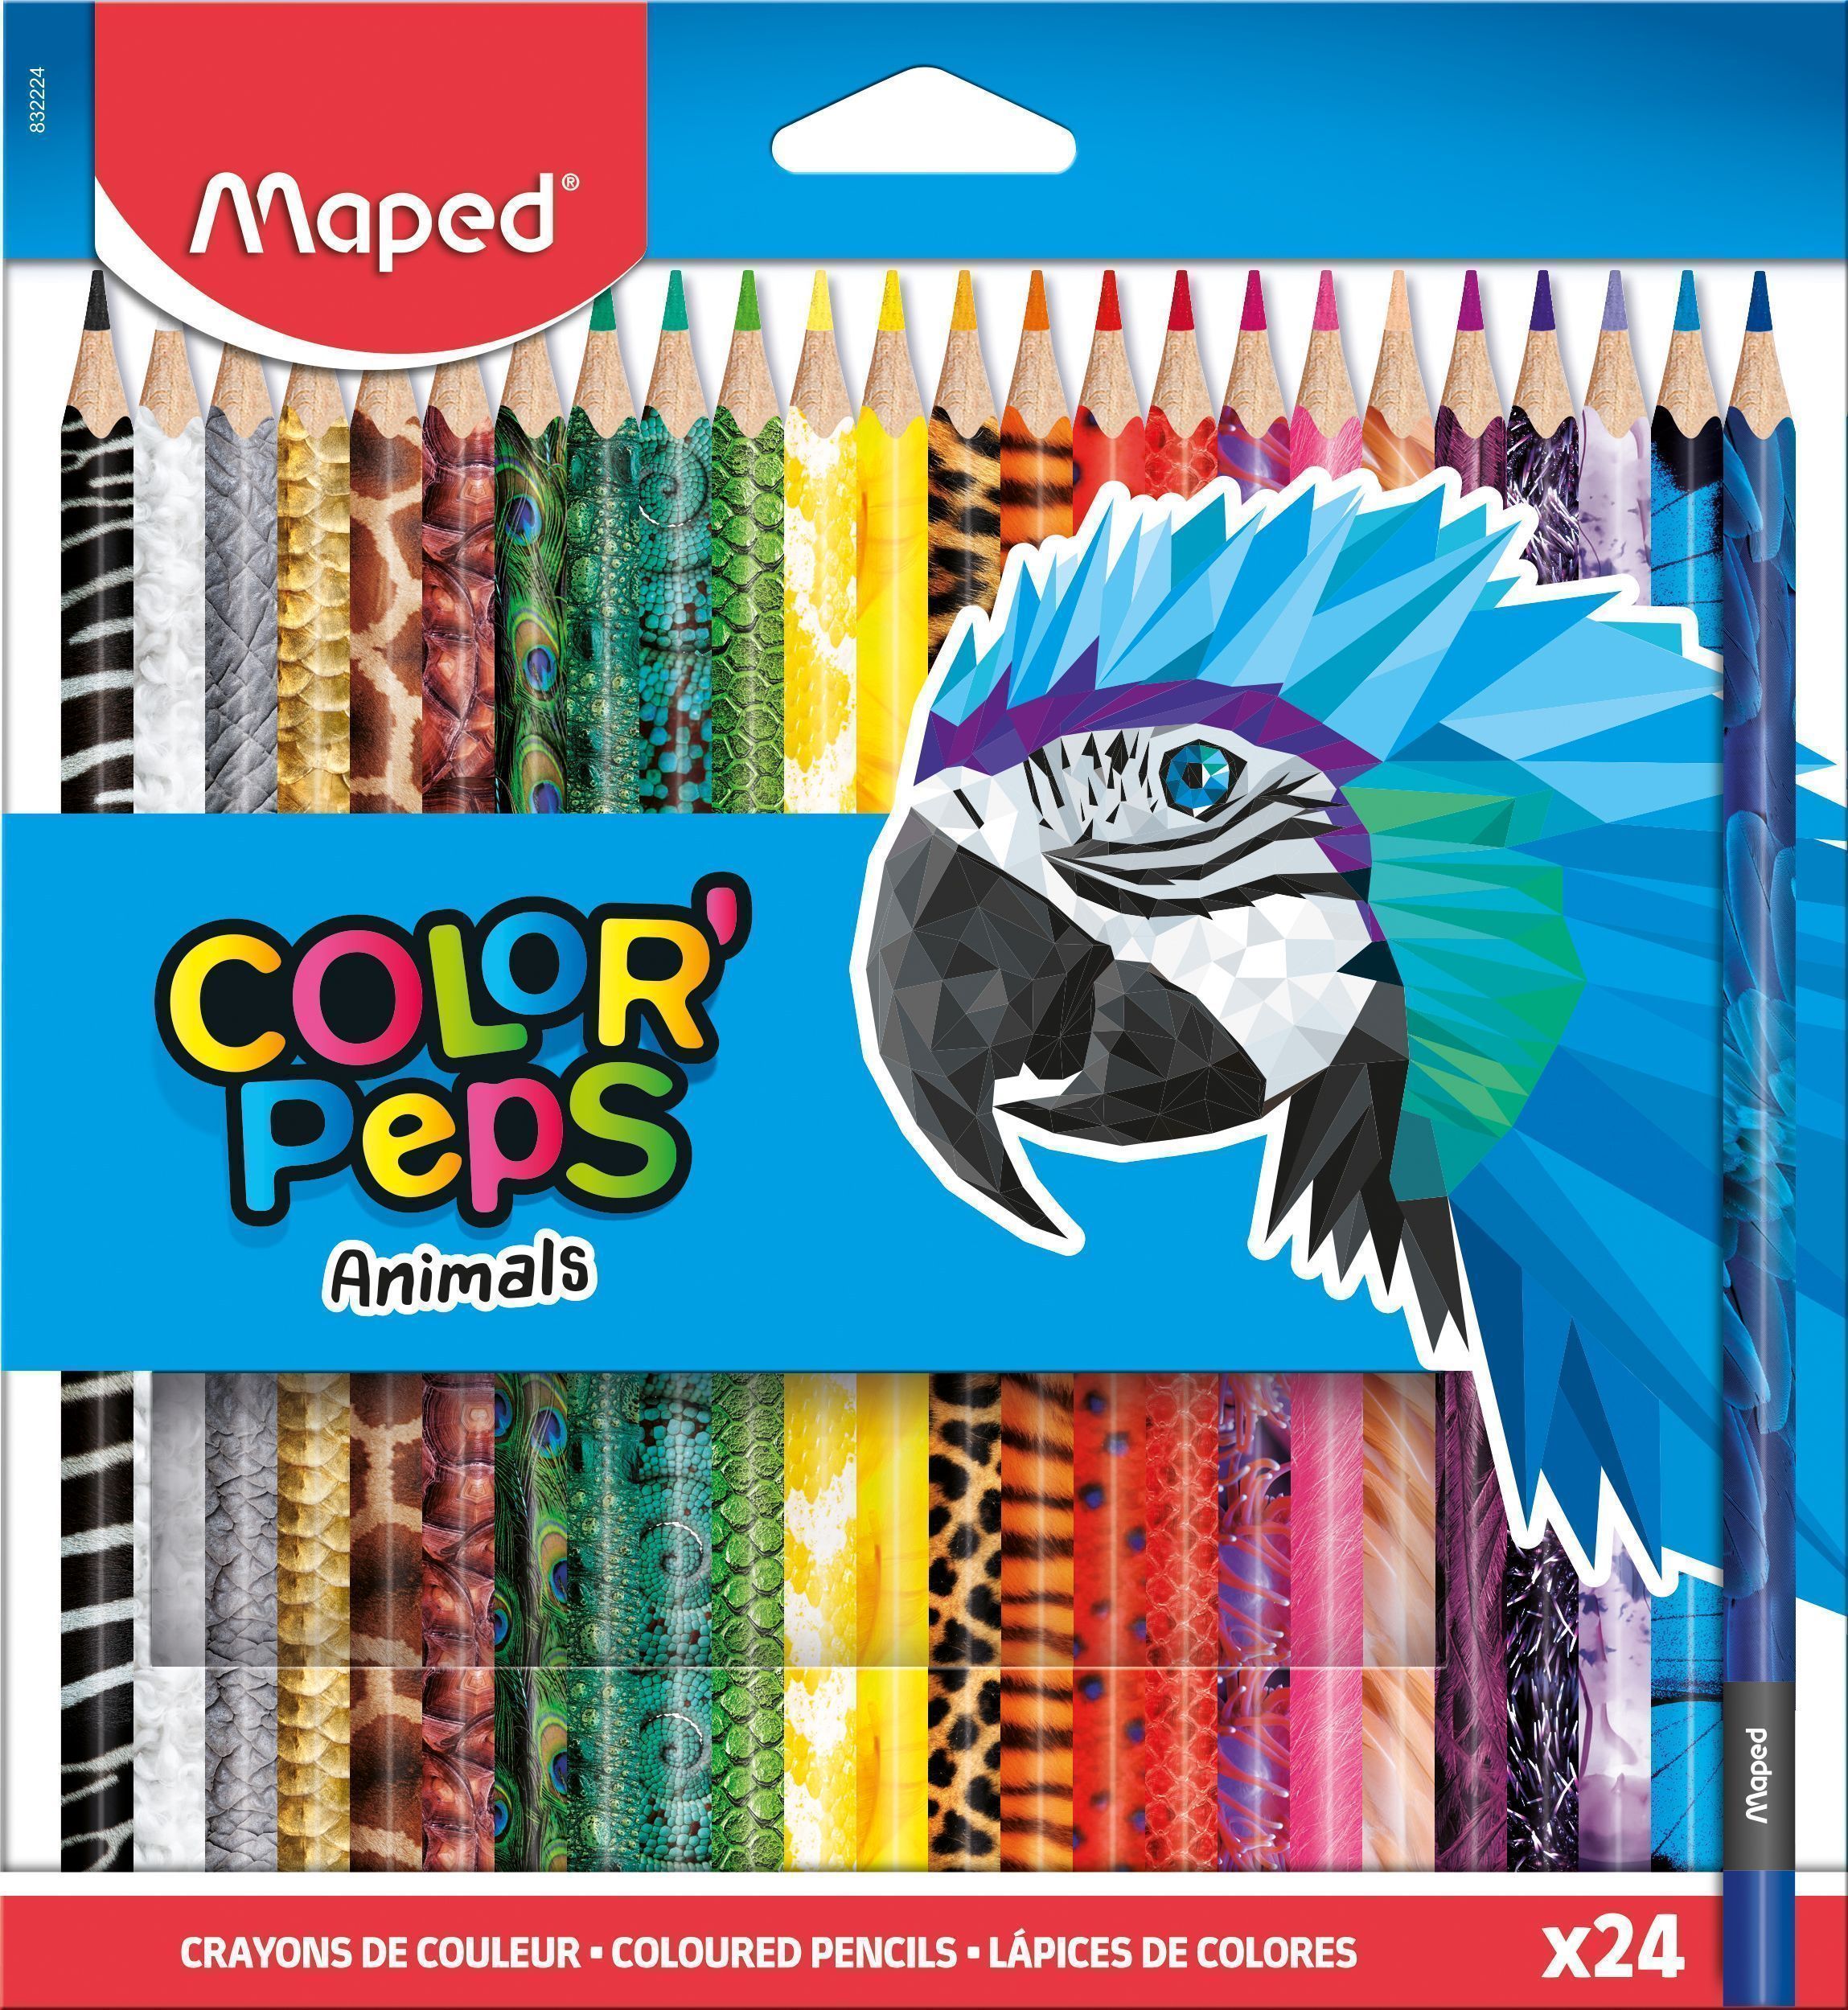   MAPED COLOR'PEPS 24 , , , ,    